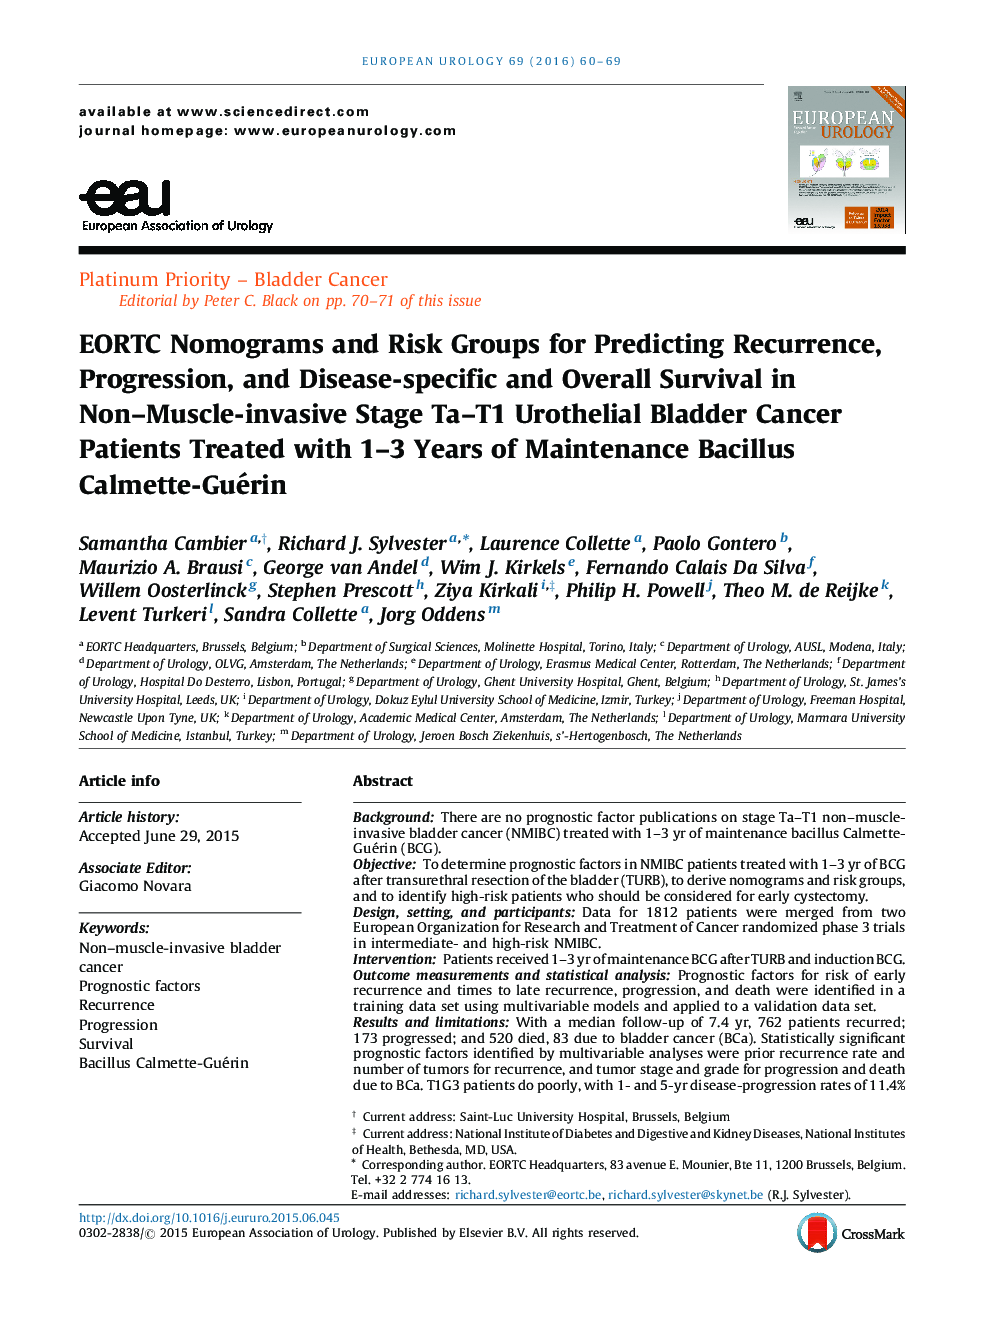 EORTC Nomograms and Risk Groups for Predicting Recurrence, Progression, and Disease-specific and Overall Survival in Non-Muscle-invasive Stage Ta-T1 Urothelial Bladder Cancer Patients Treated with 1-3 Years of Maintenance Bacillus Calmette-Guérinâ